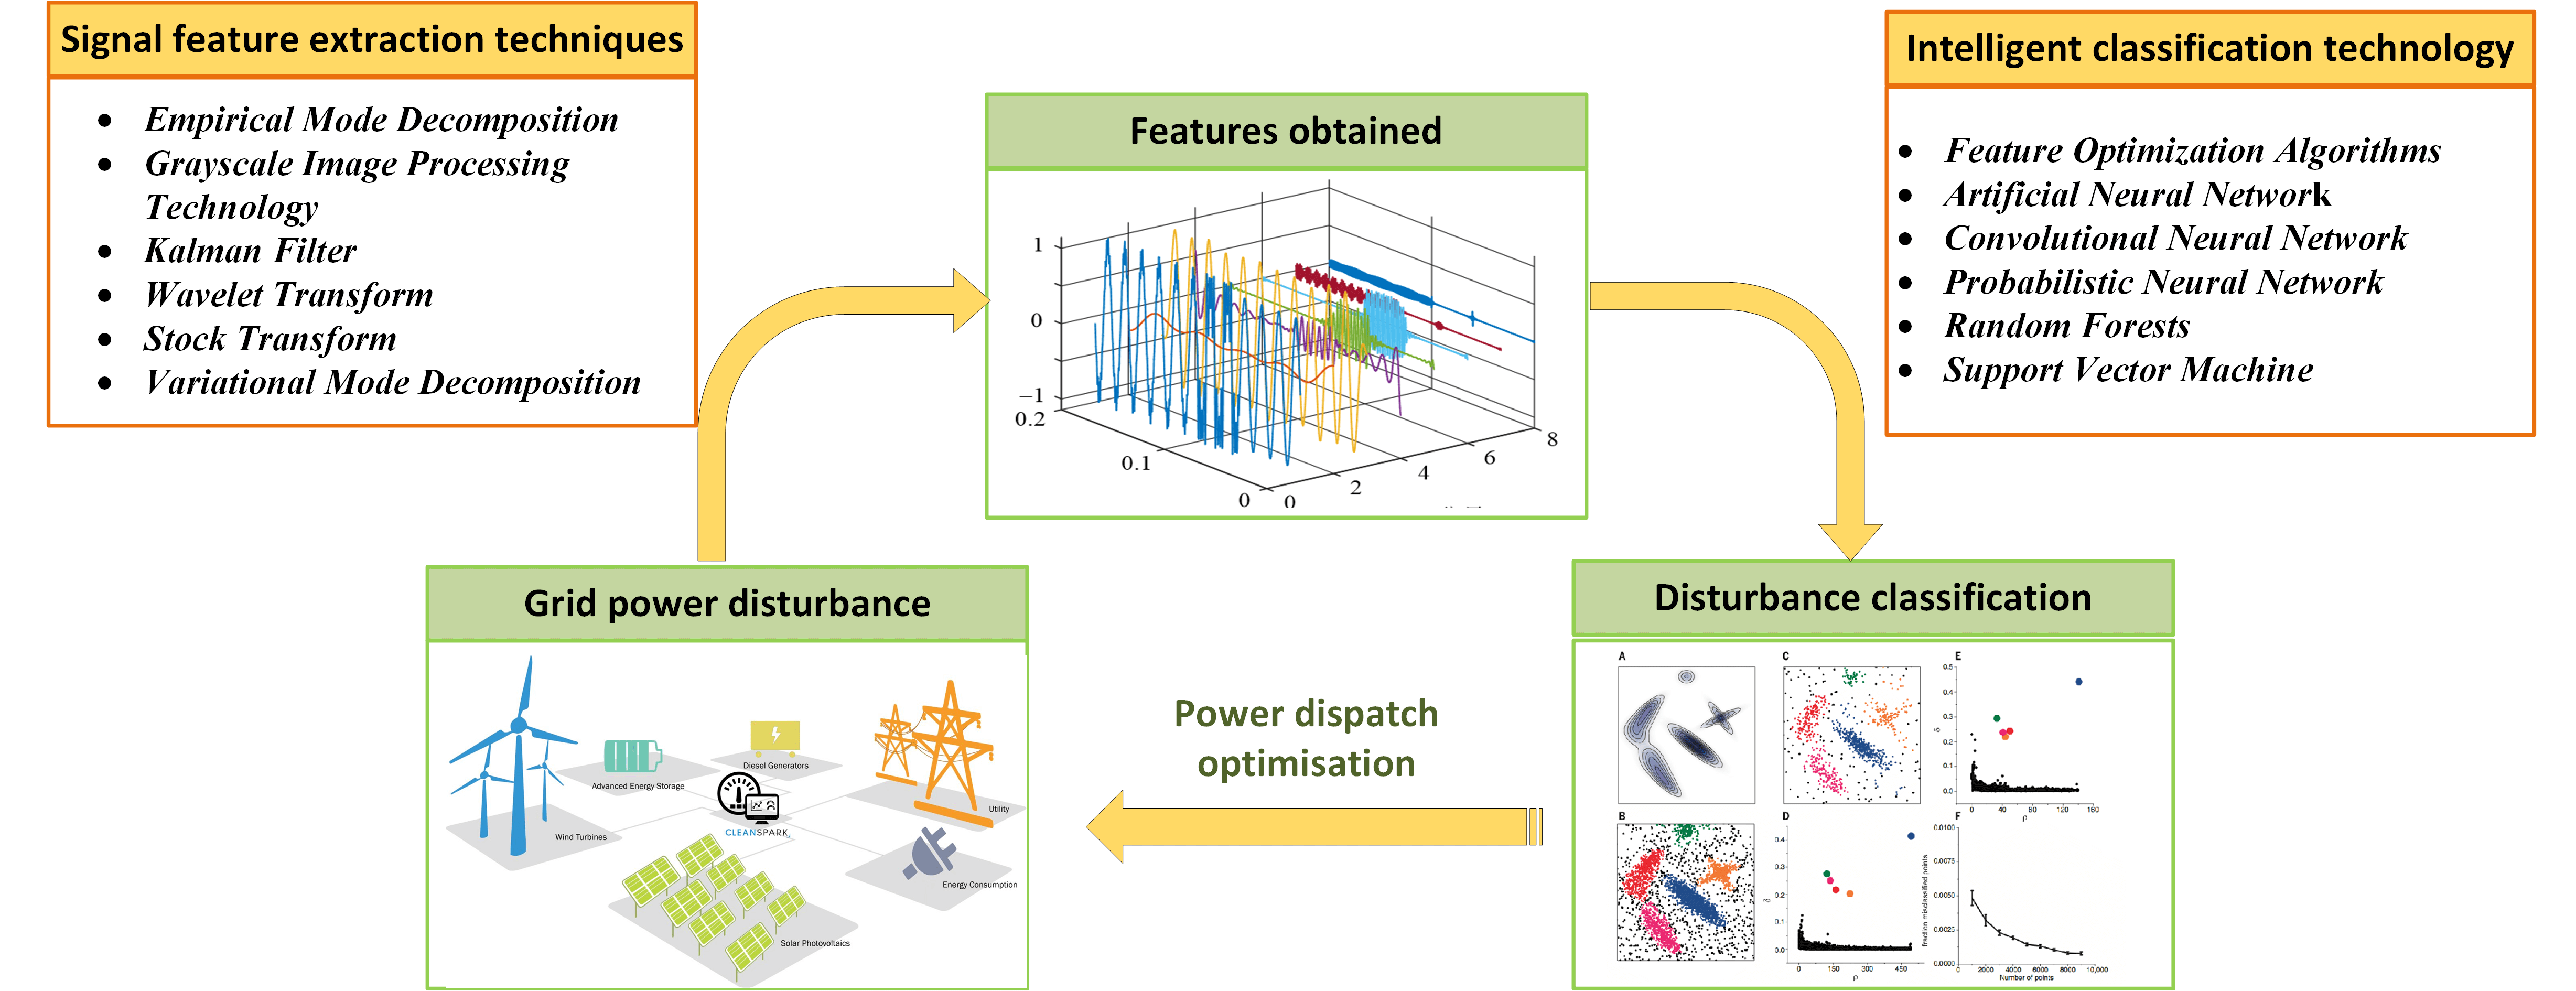 A Review on Intelligent Detection and Classification of Power Quality Disturbances: Trends, Methodologies, and Prospects